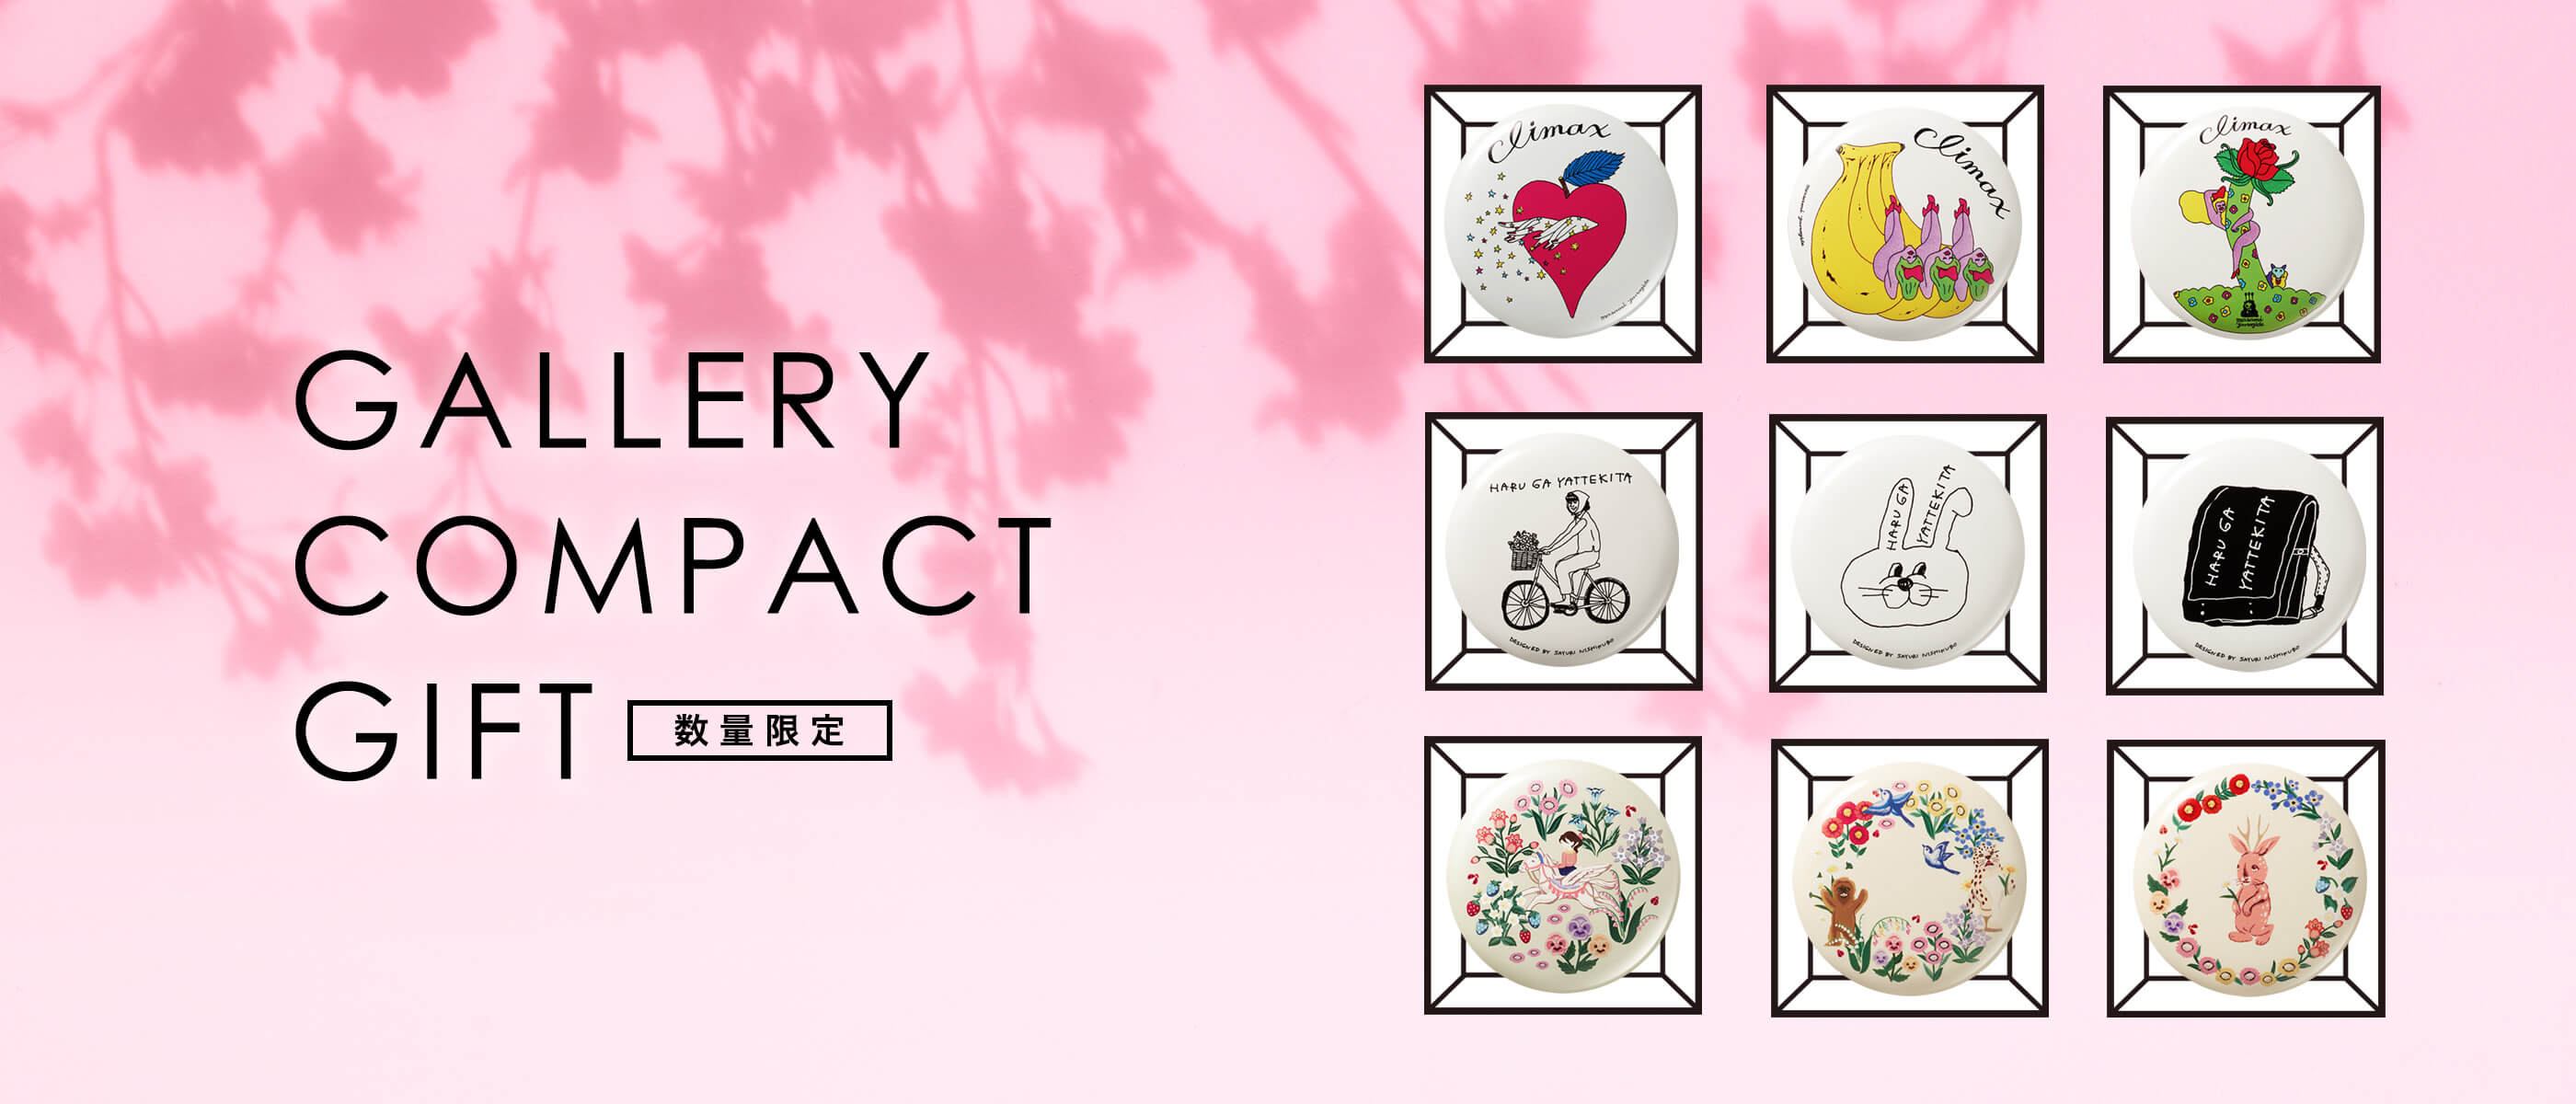 GALLERY COMPACT GIFT【数量限定】